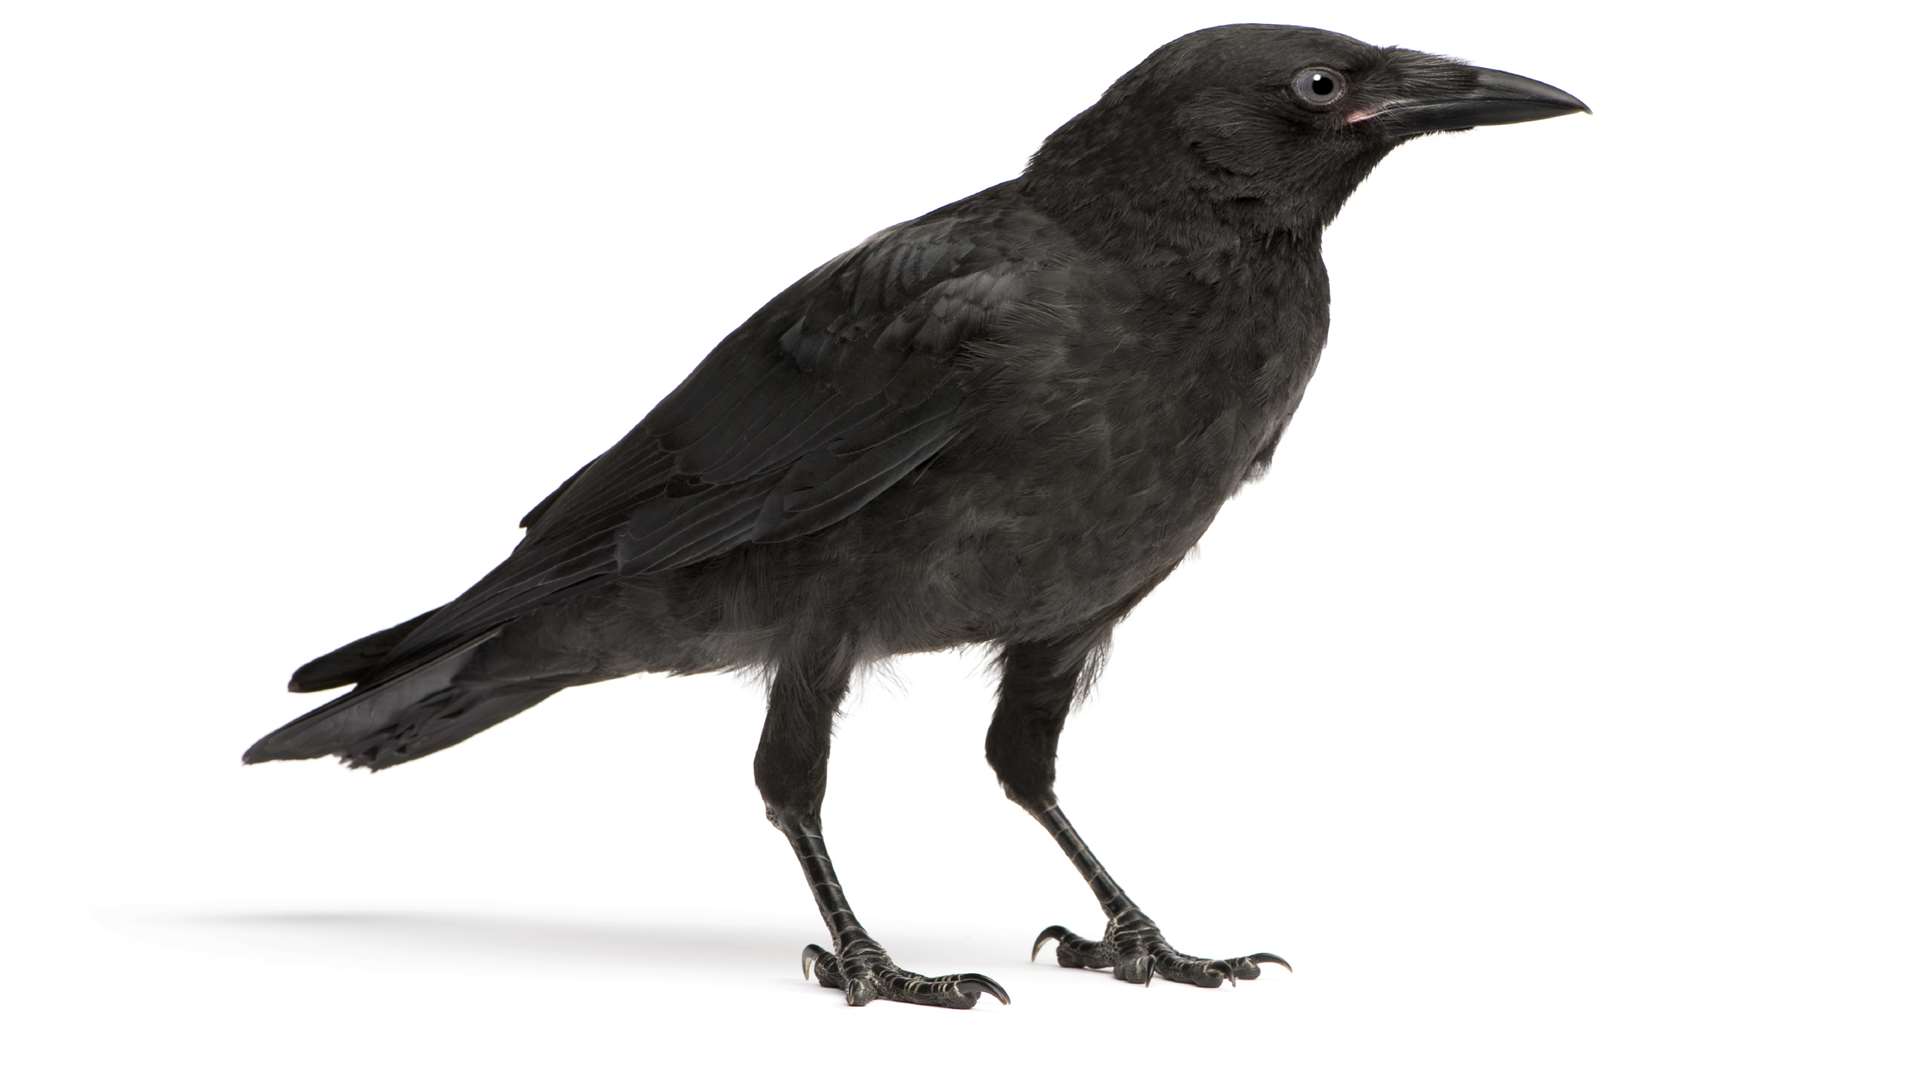 Crows appeared "lethargic" after eating seeds.